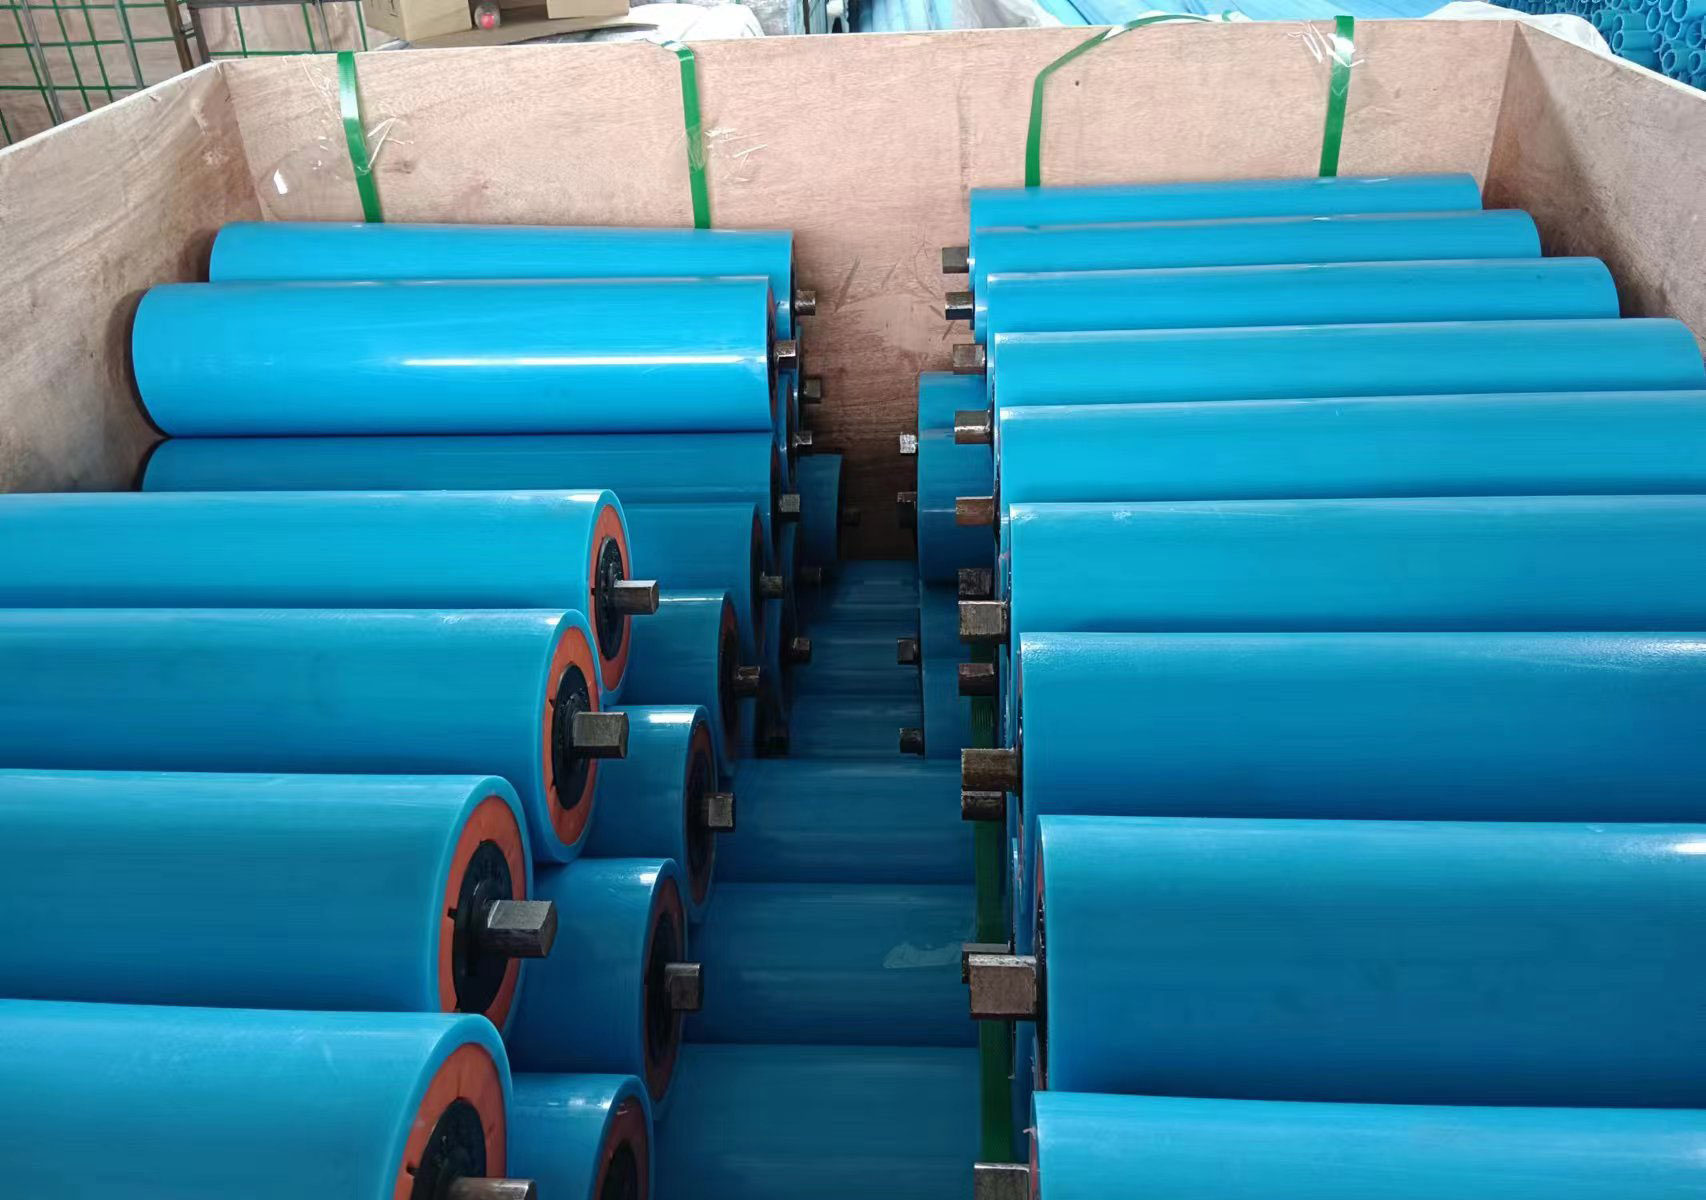 What are the main advantages of hdpe rollers?